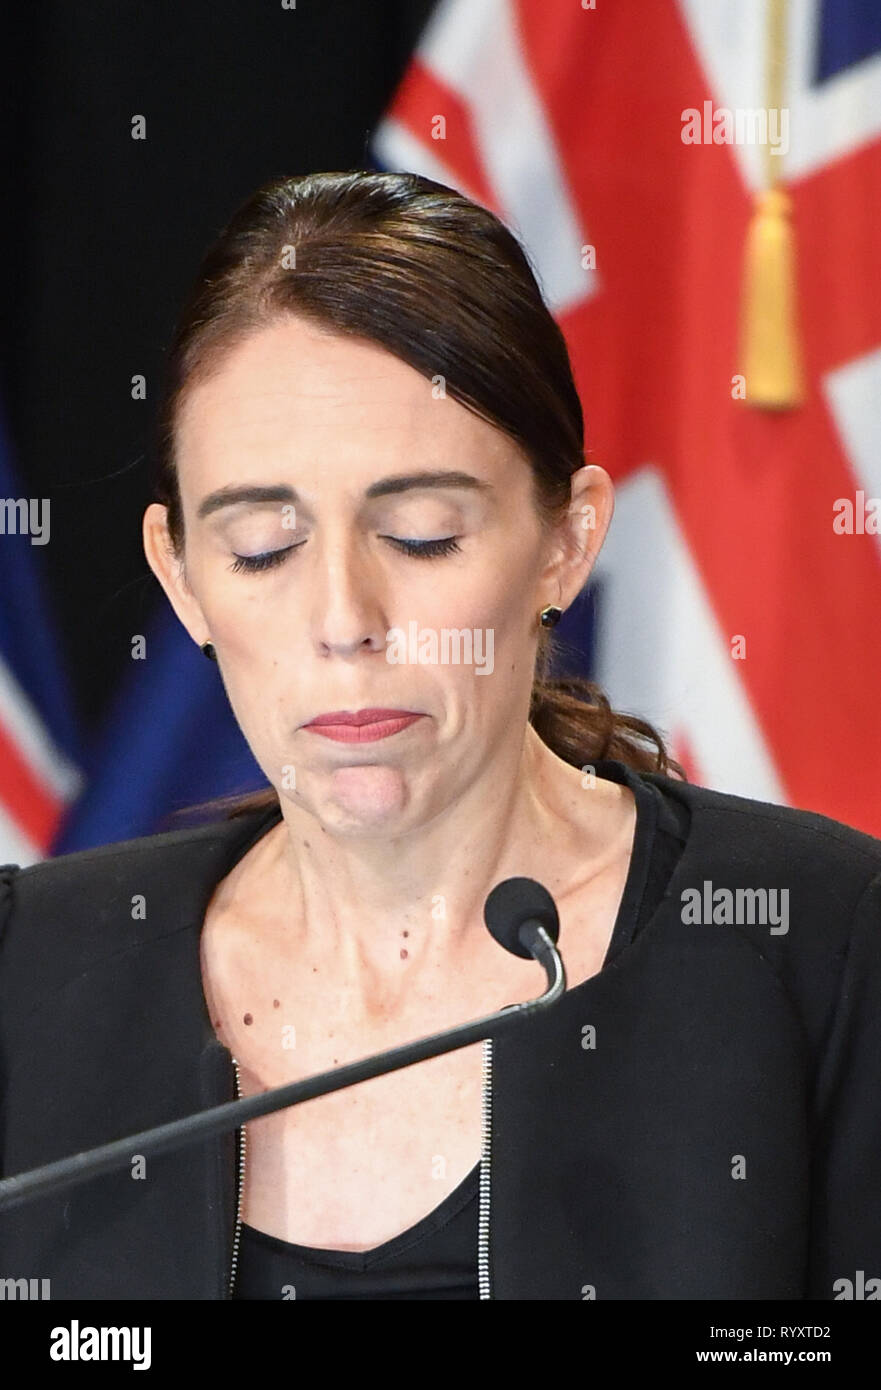 Wellington, New Zealand. 16th Mar, 2019. New Zealand Prime Minister Jacinda Ardern reacts during a briefing in Wellington, capital of New Zealand, on March 16, 2019. Jacinda Ardern reiterated to the public on Saturday morning that the country's gun law will be changed. Gunmen opened fire in two separate mosques in Christchurch on Friday, killing 49 people and wounding 48 others. Credit: Guo Lei/Xinhua/Alamy Live News Stock Photo